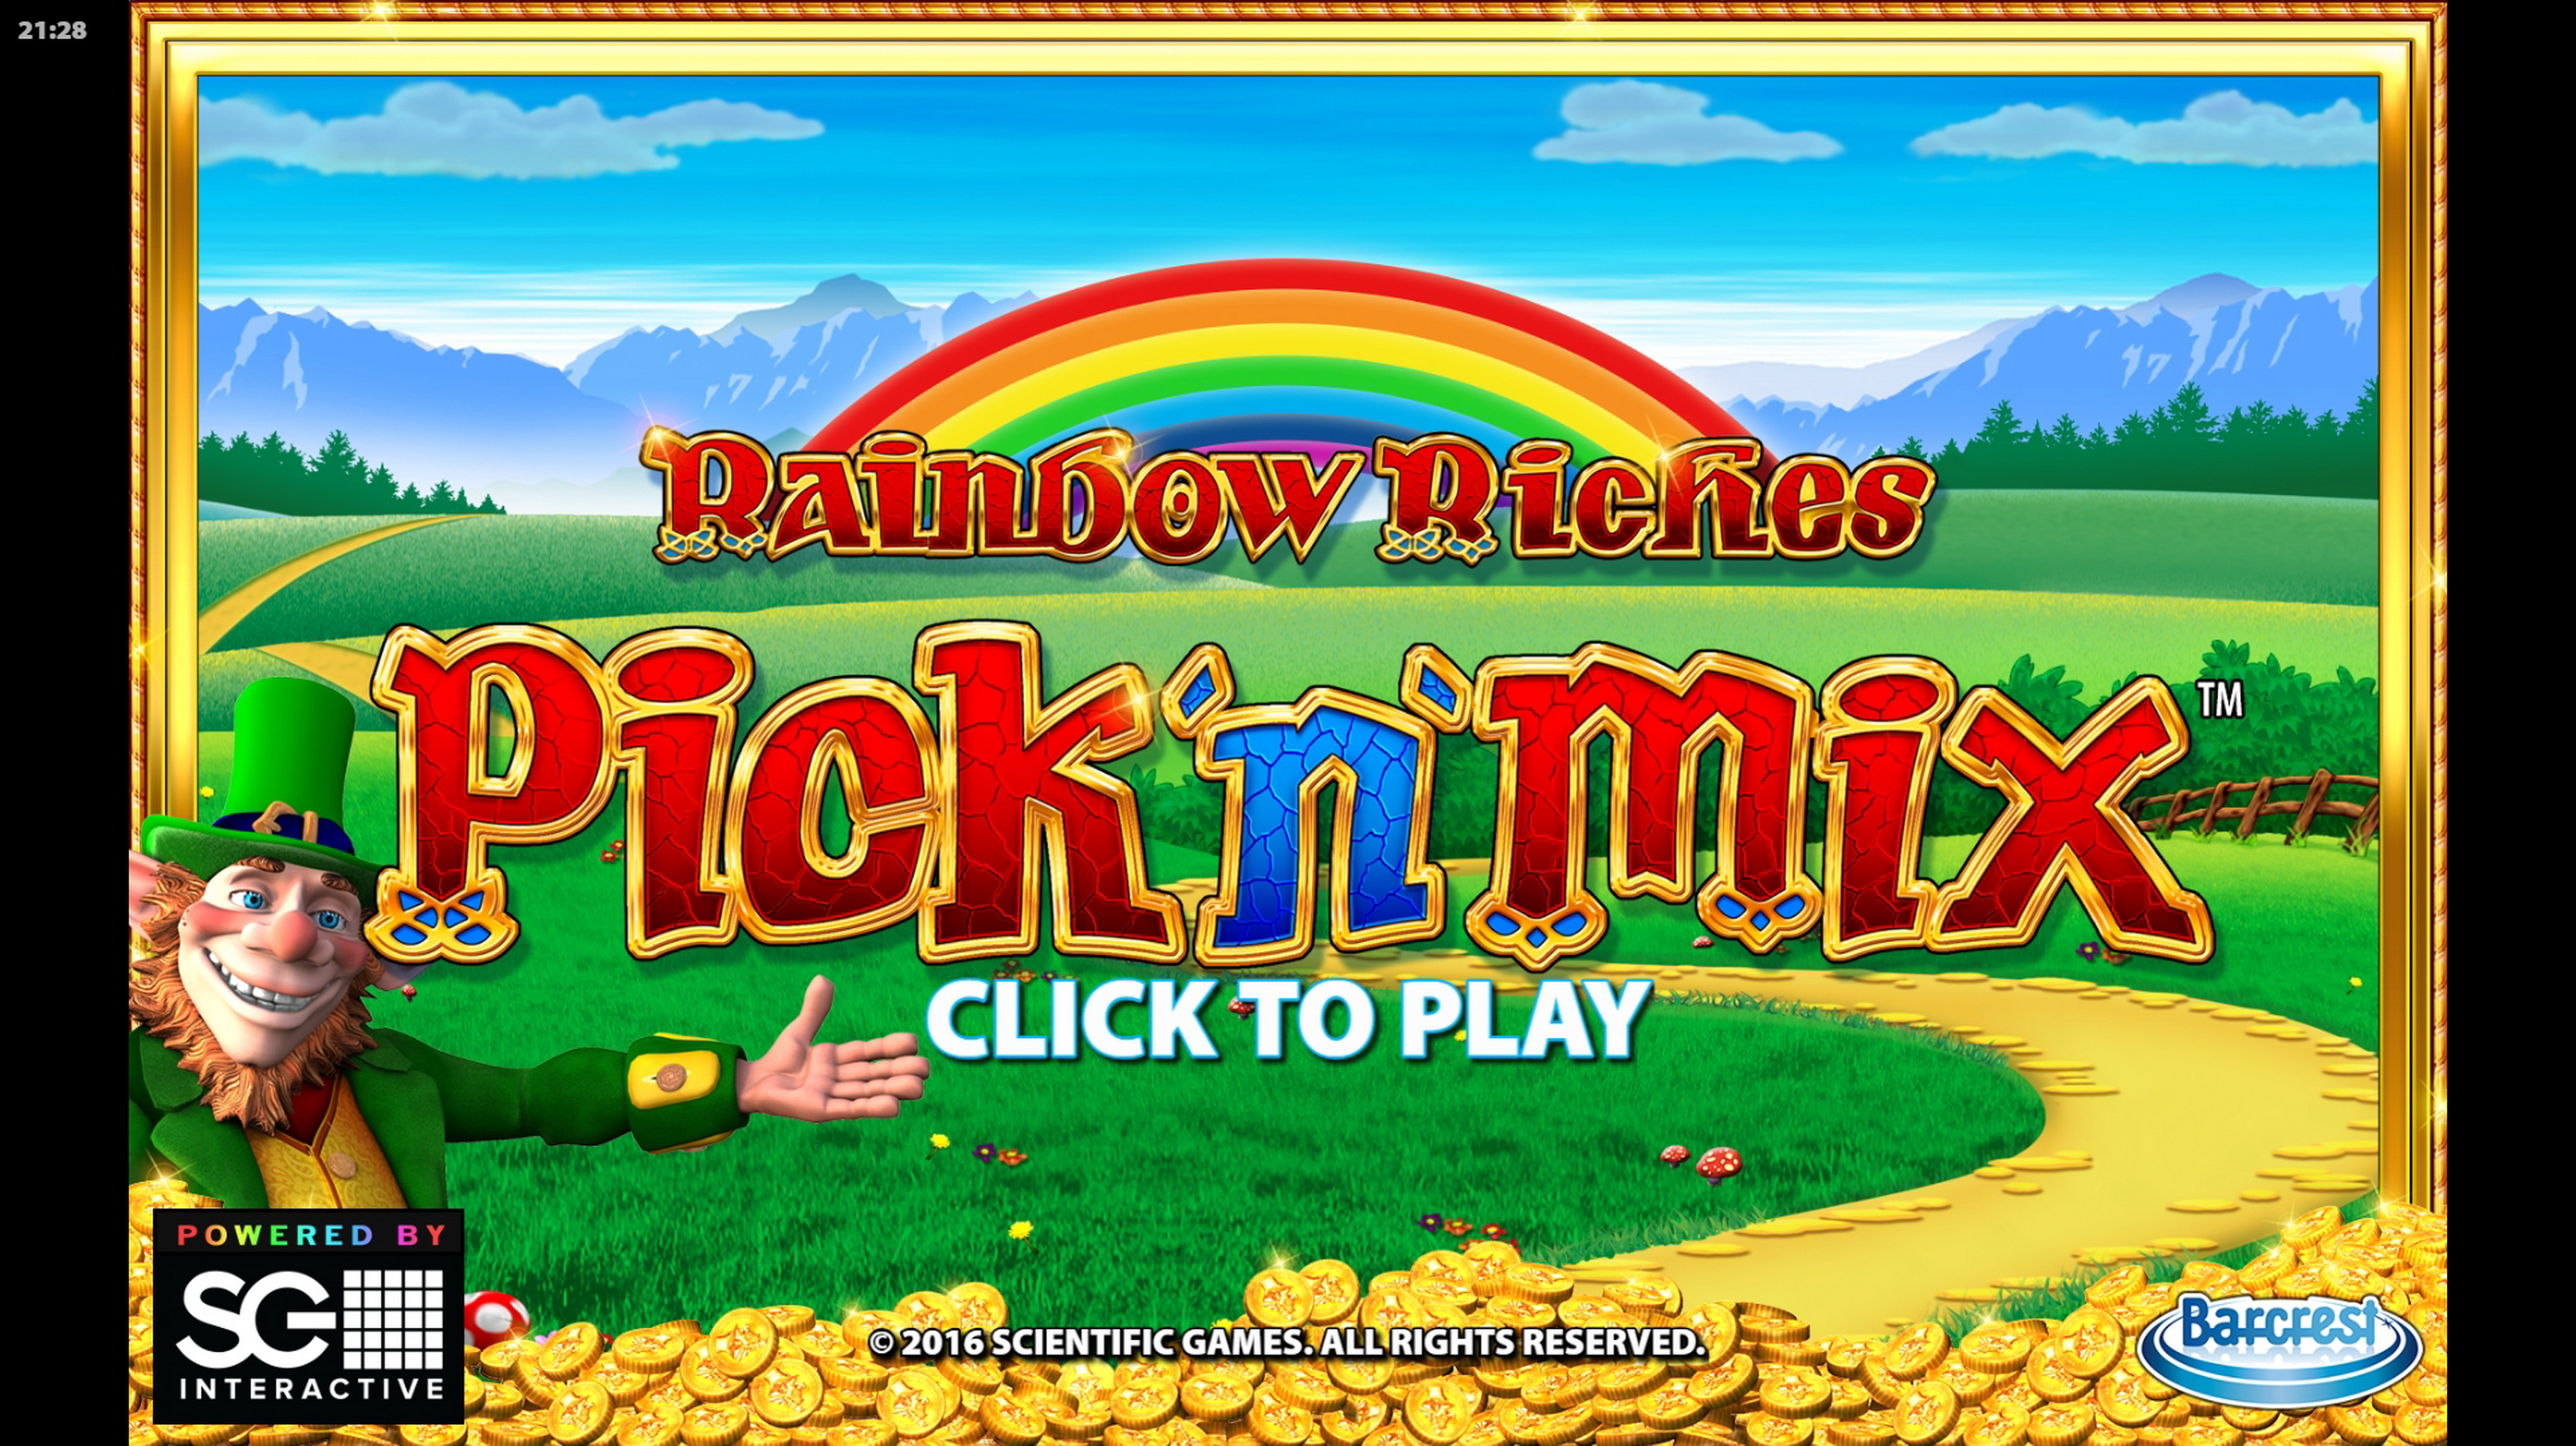 Play Rainbow Riches Pick'n'Mix Free Casino Slot Game by Barcrest Games